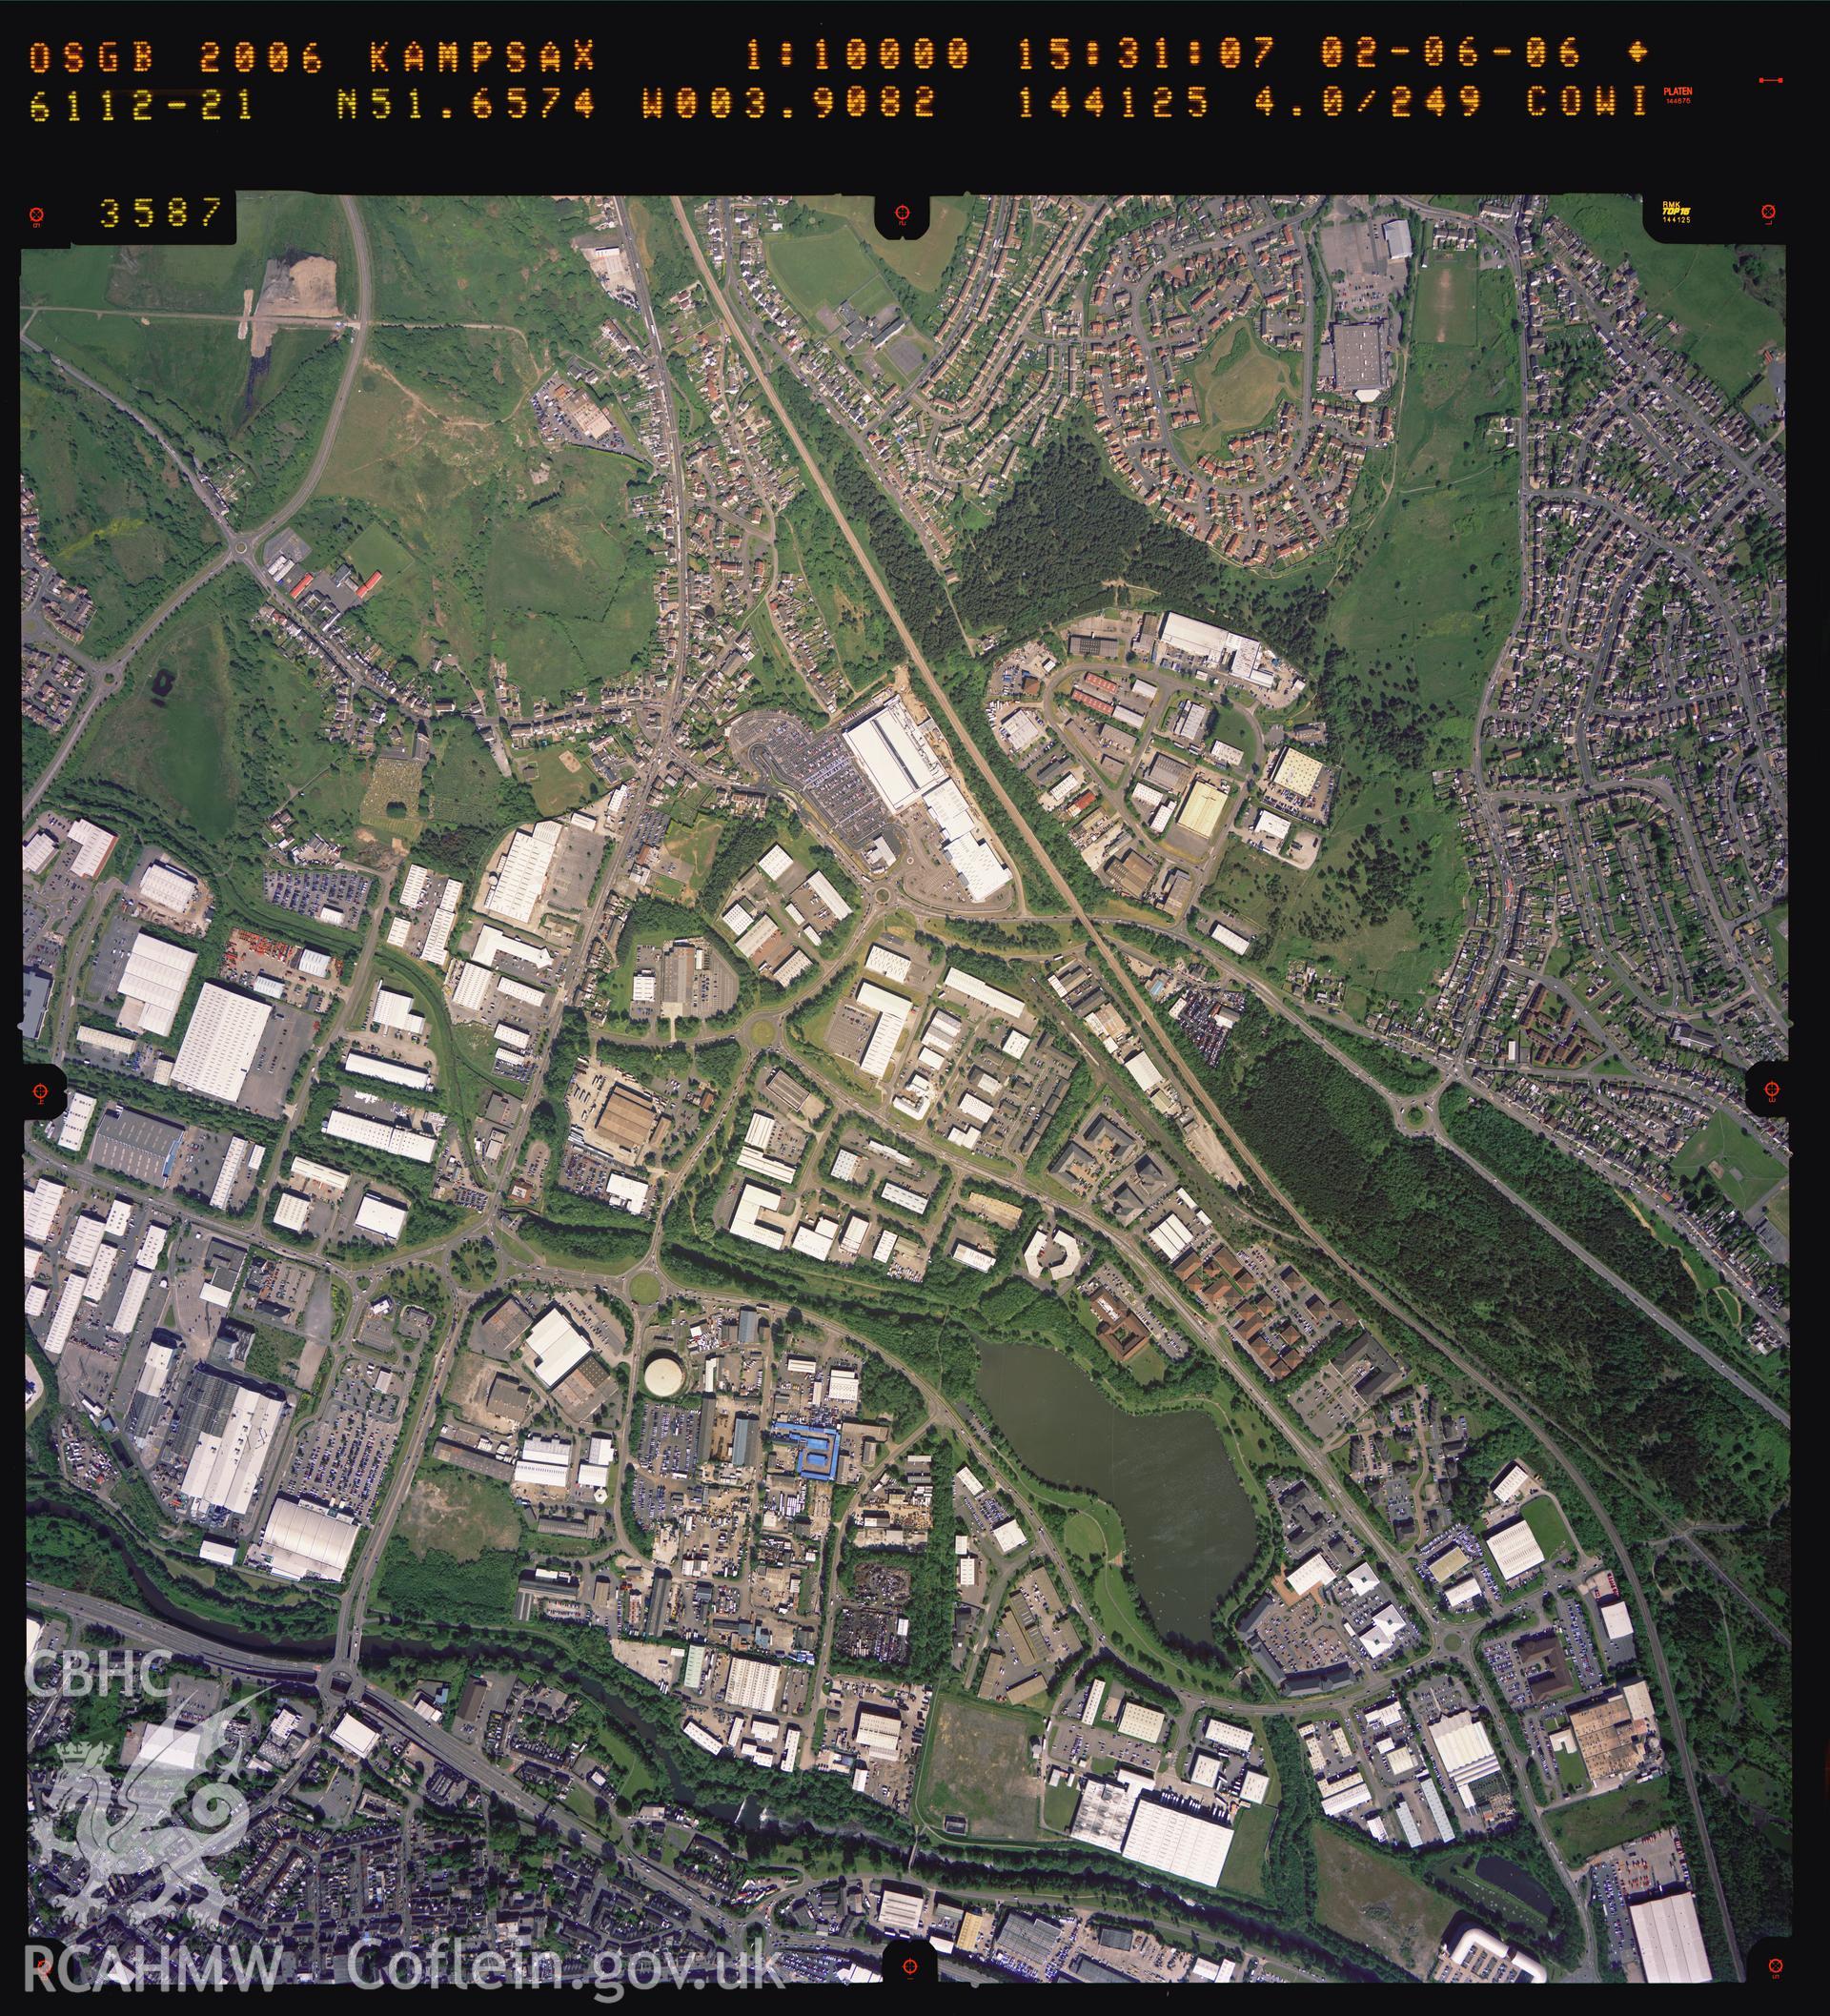 Digitized copy of a colour aerial photograph showing the Winsh-wen area, Swansea, taken by Ordnance Survey, 2006.